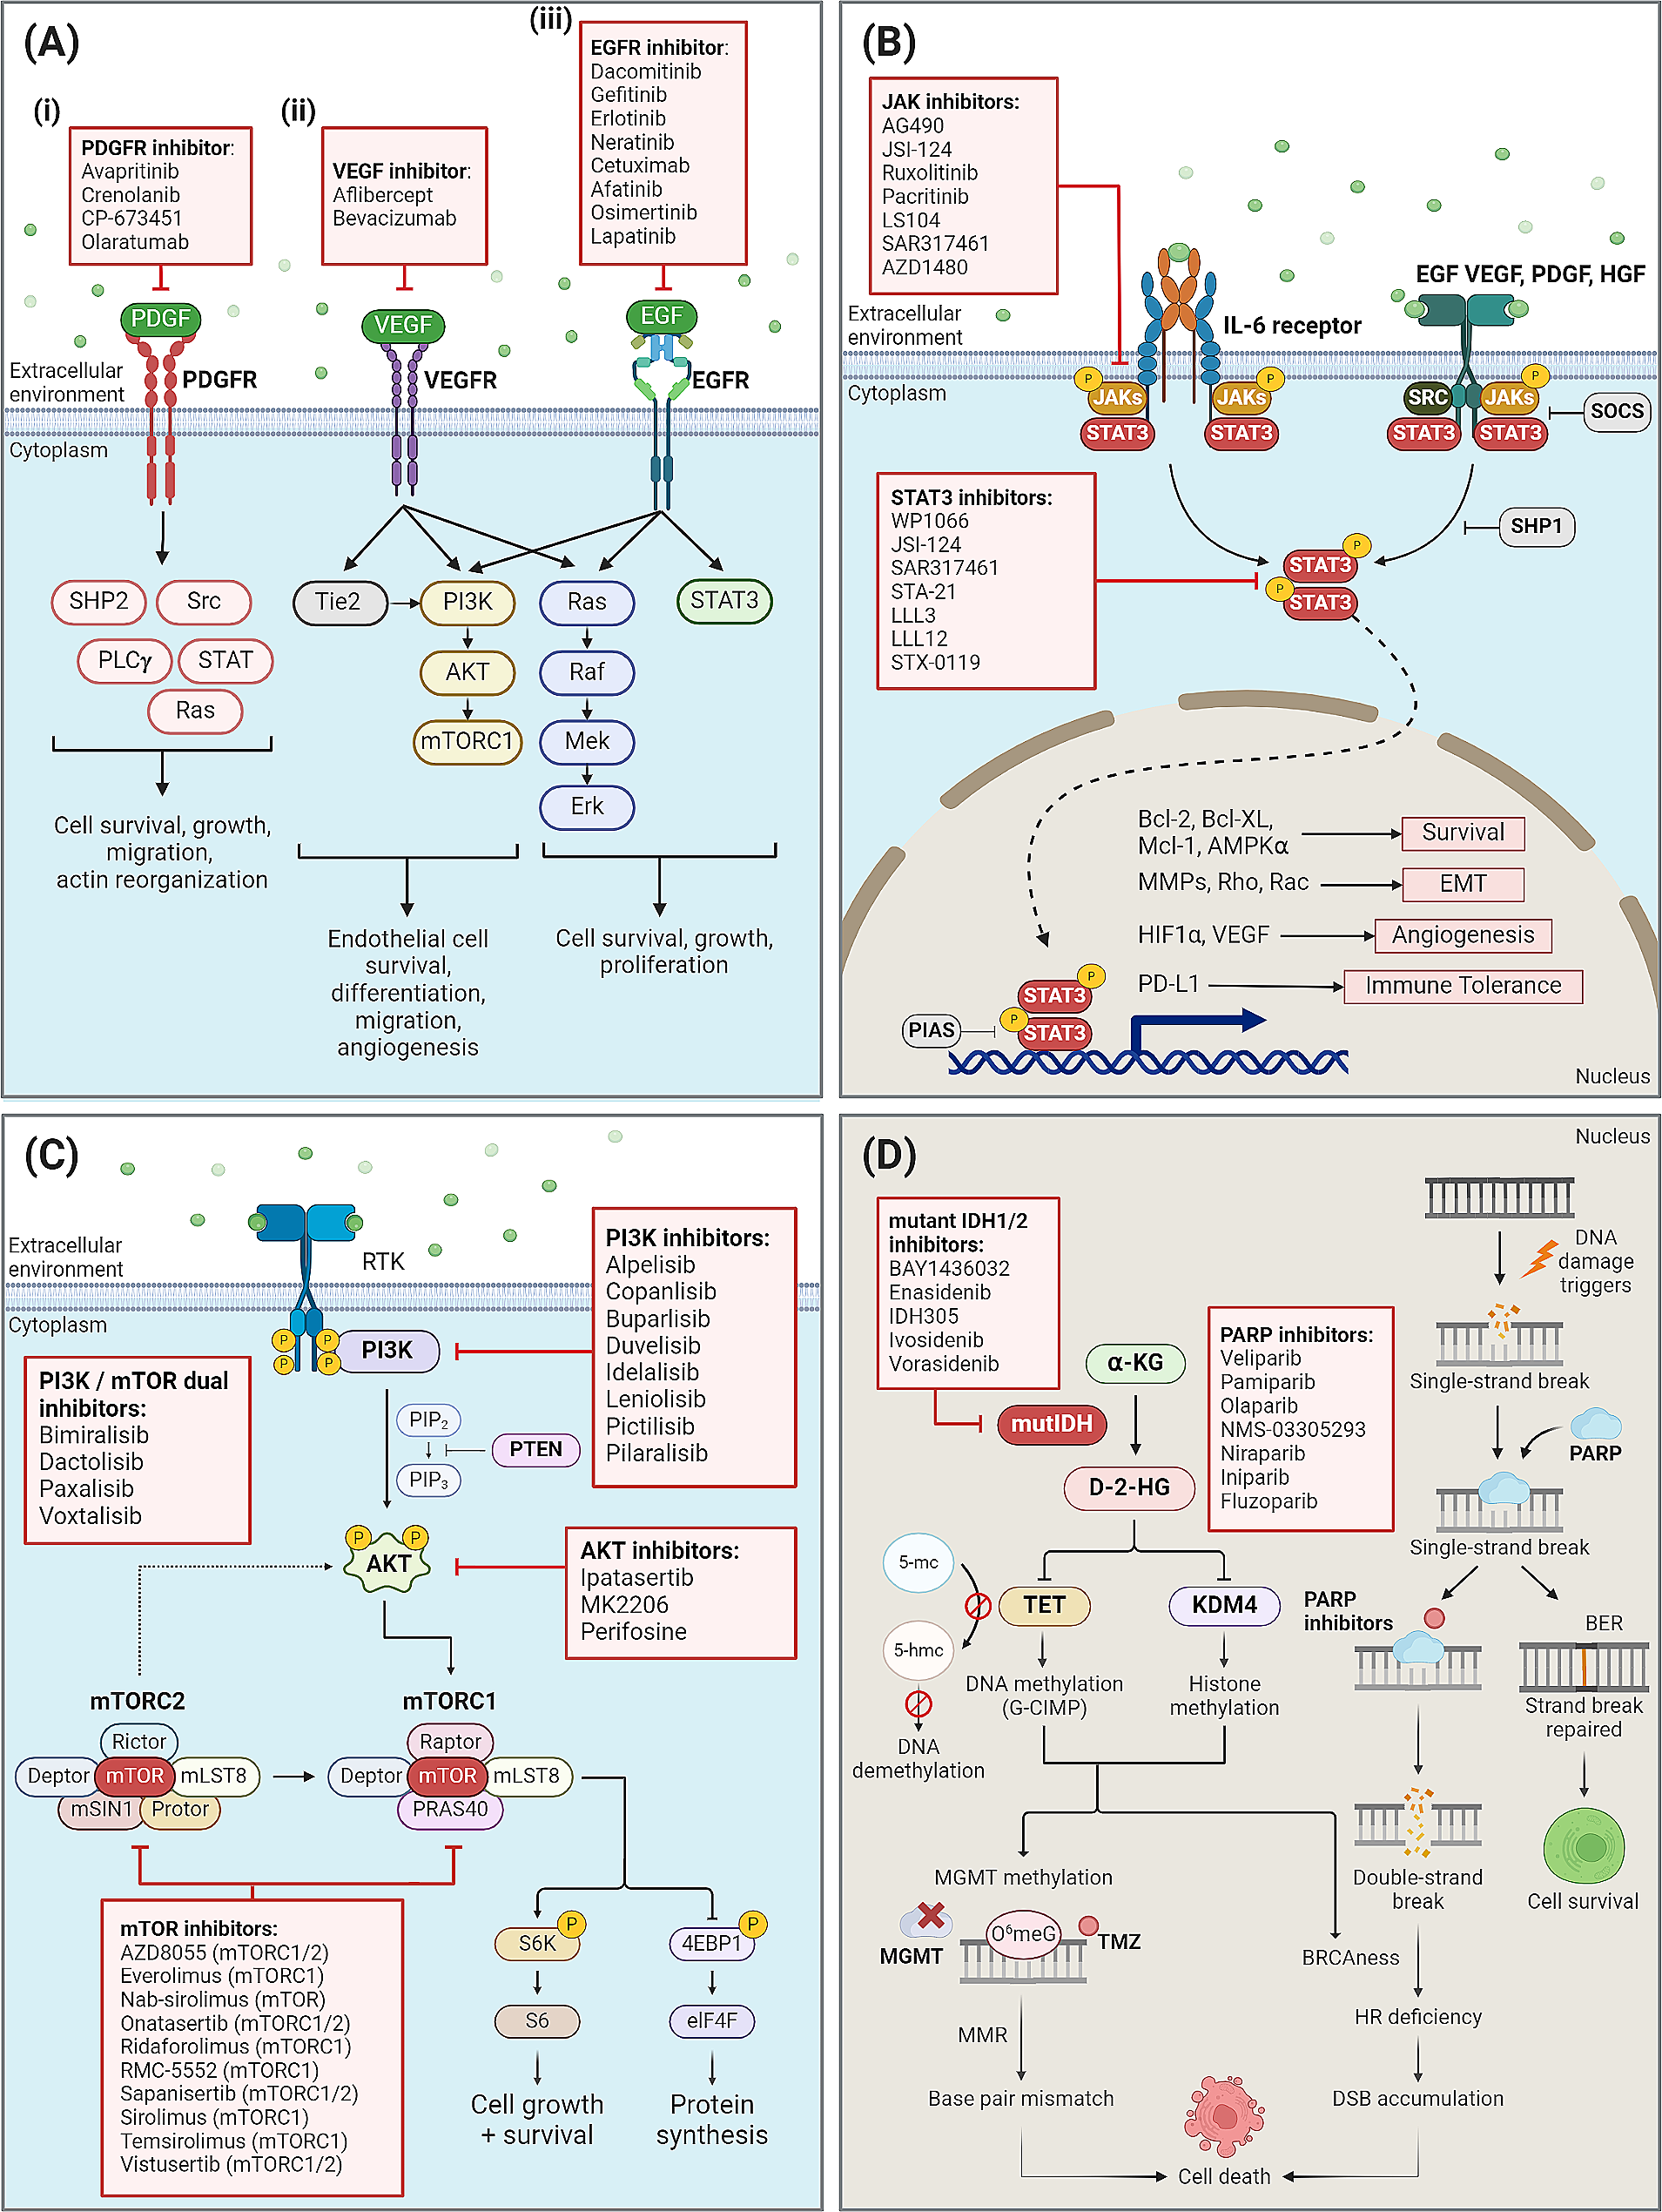 Mechanistic insights and the clinical prospects of targeted therapies for glioblastoma: a comprehensive review